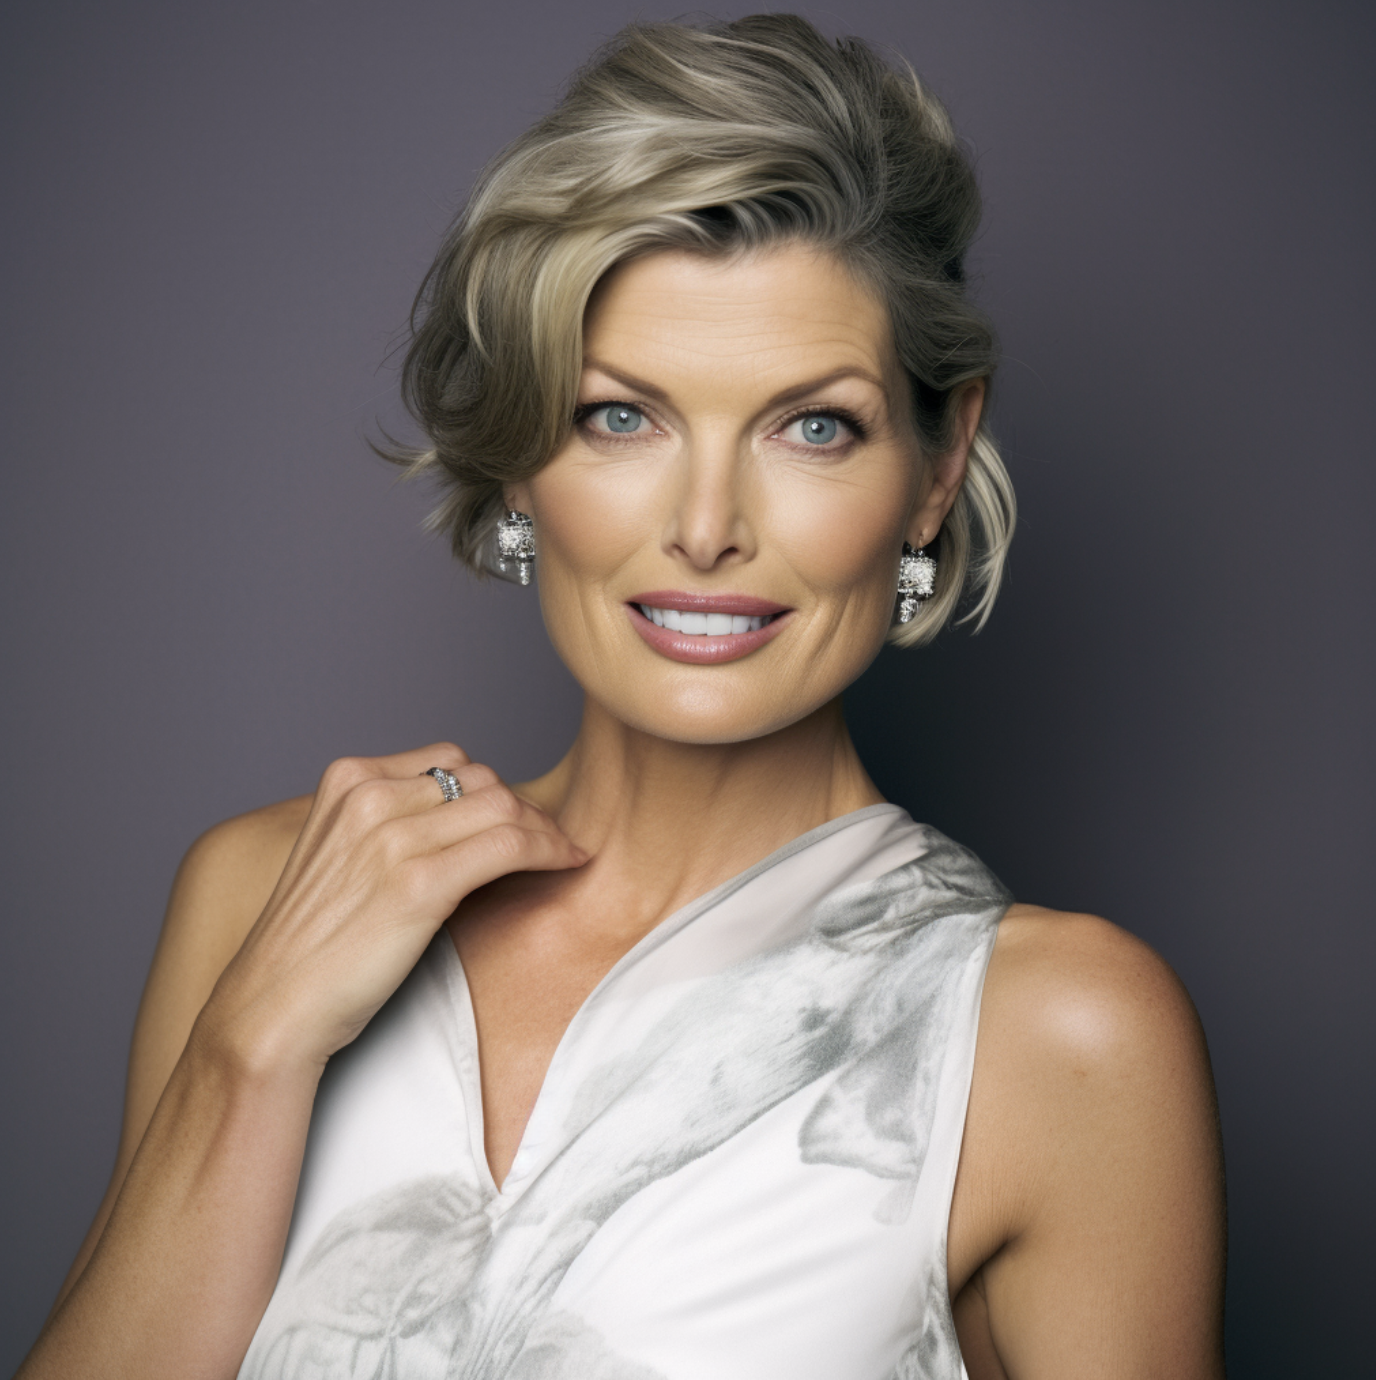 How Linda Evangelista would look today according to an AI-rendered image | Source: Midjourney